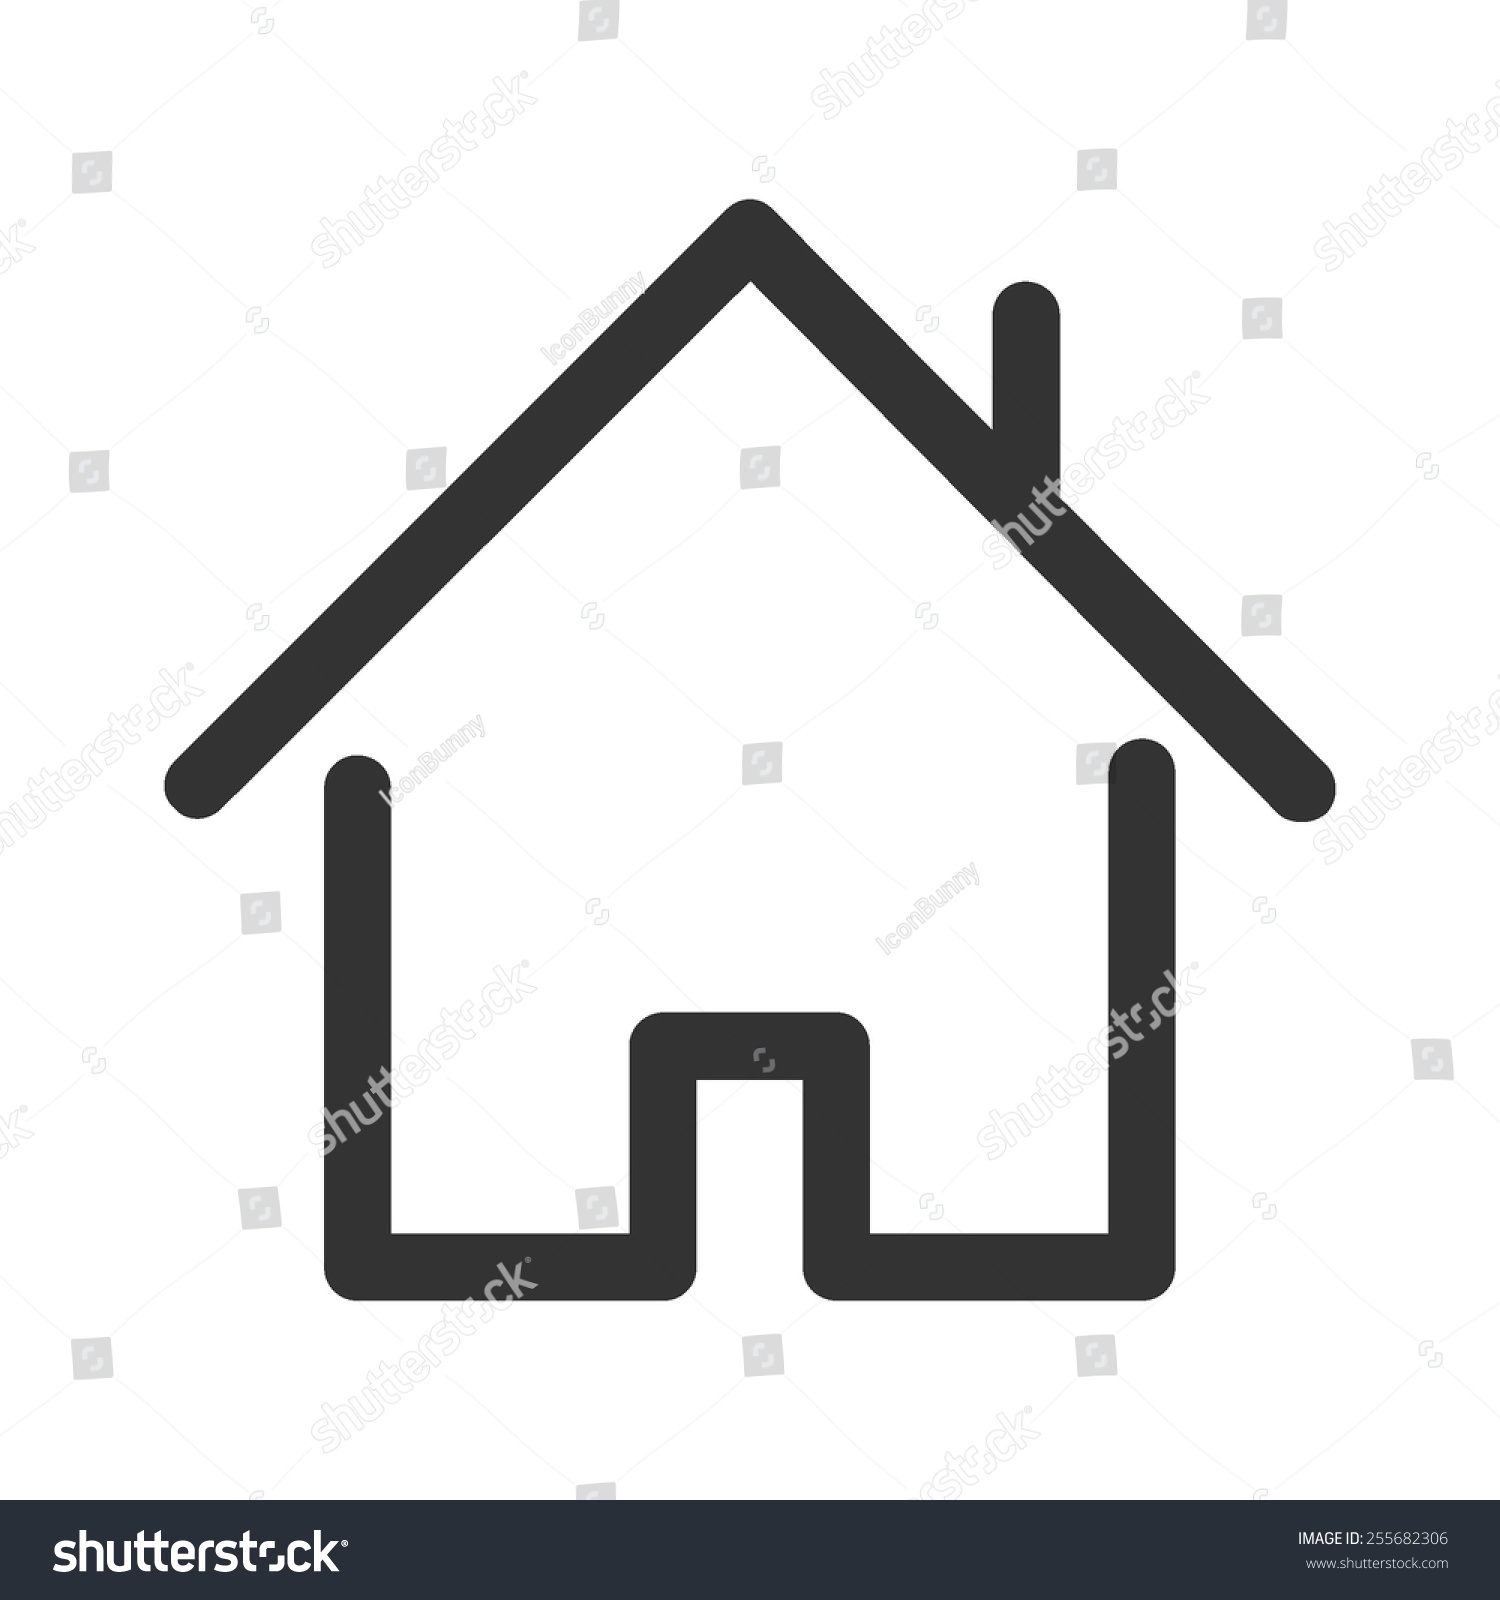 SVG of Home vector image to be used in web applications, mobile applications and print media. svg